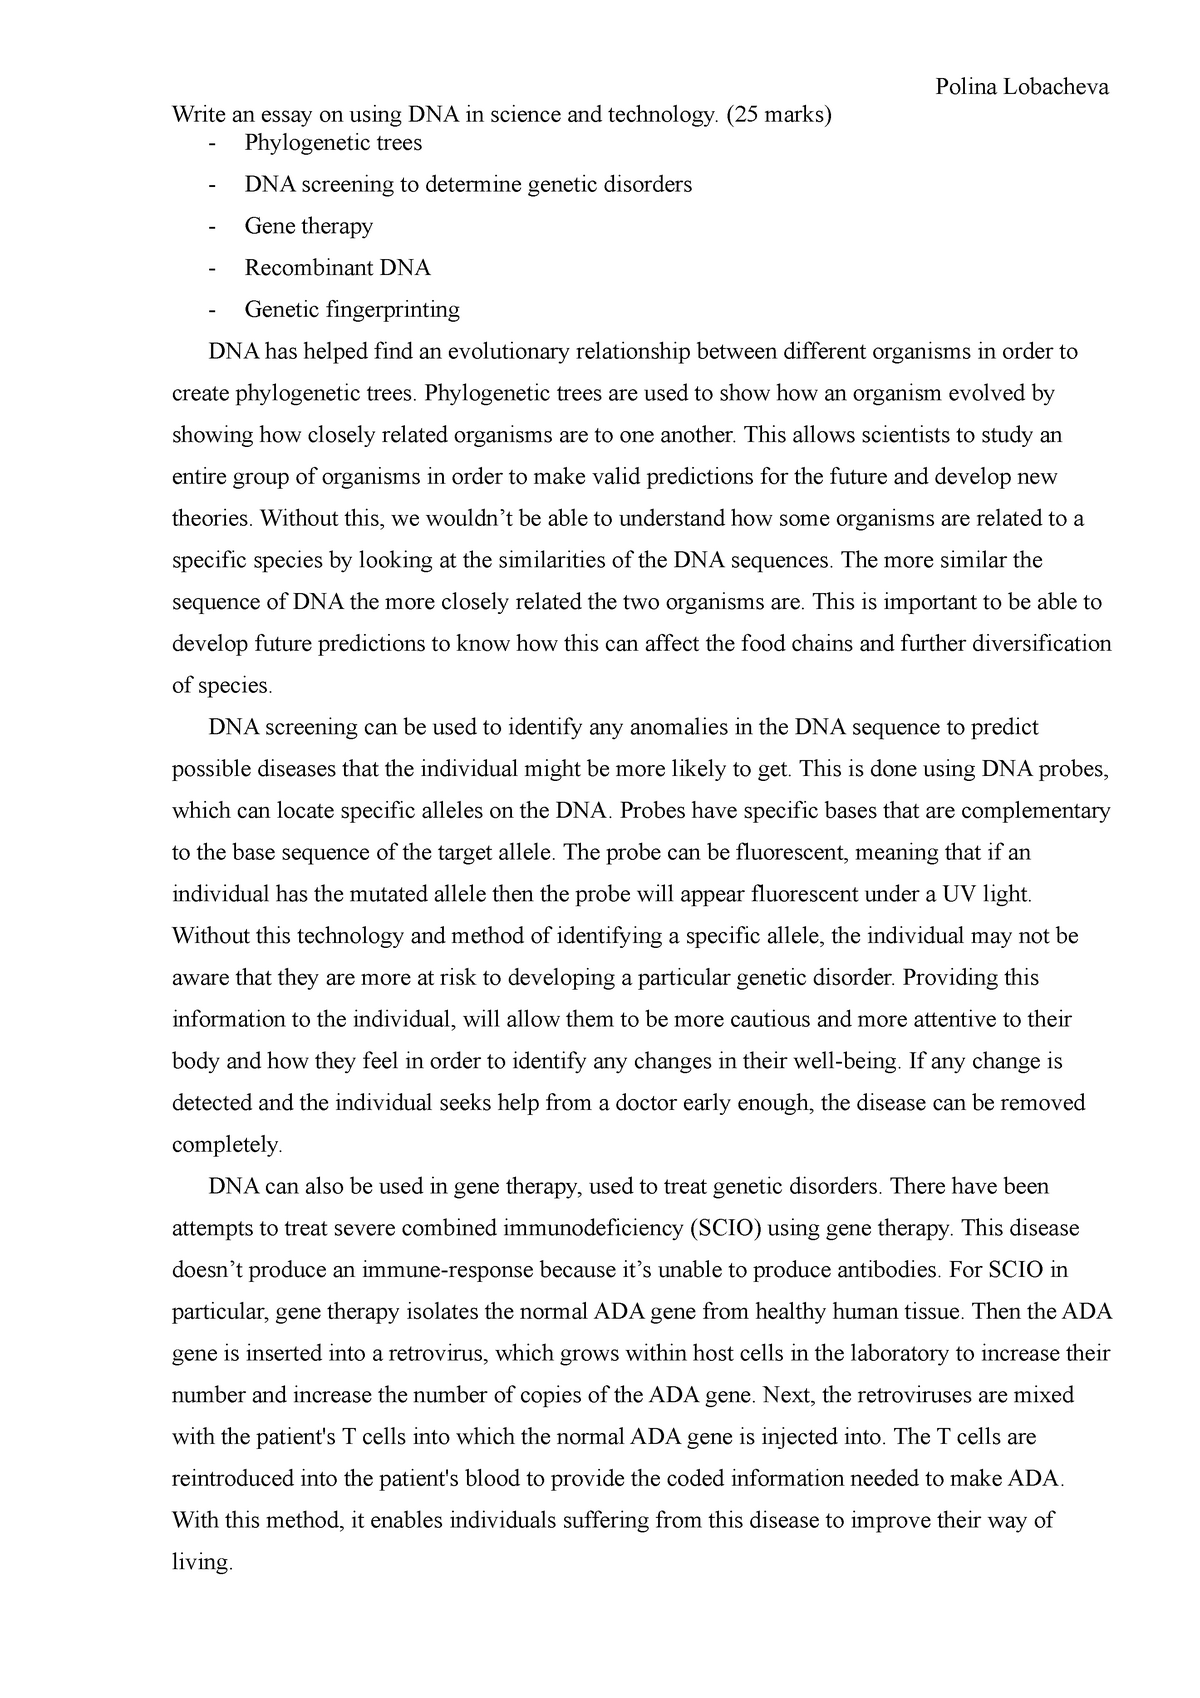 using dna in science and technology biology essay